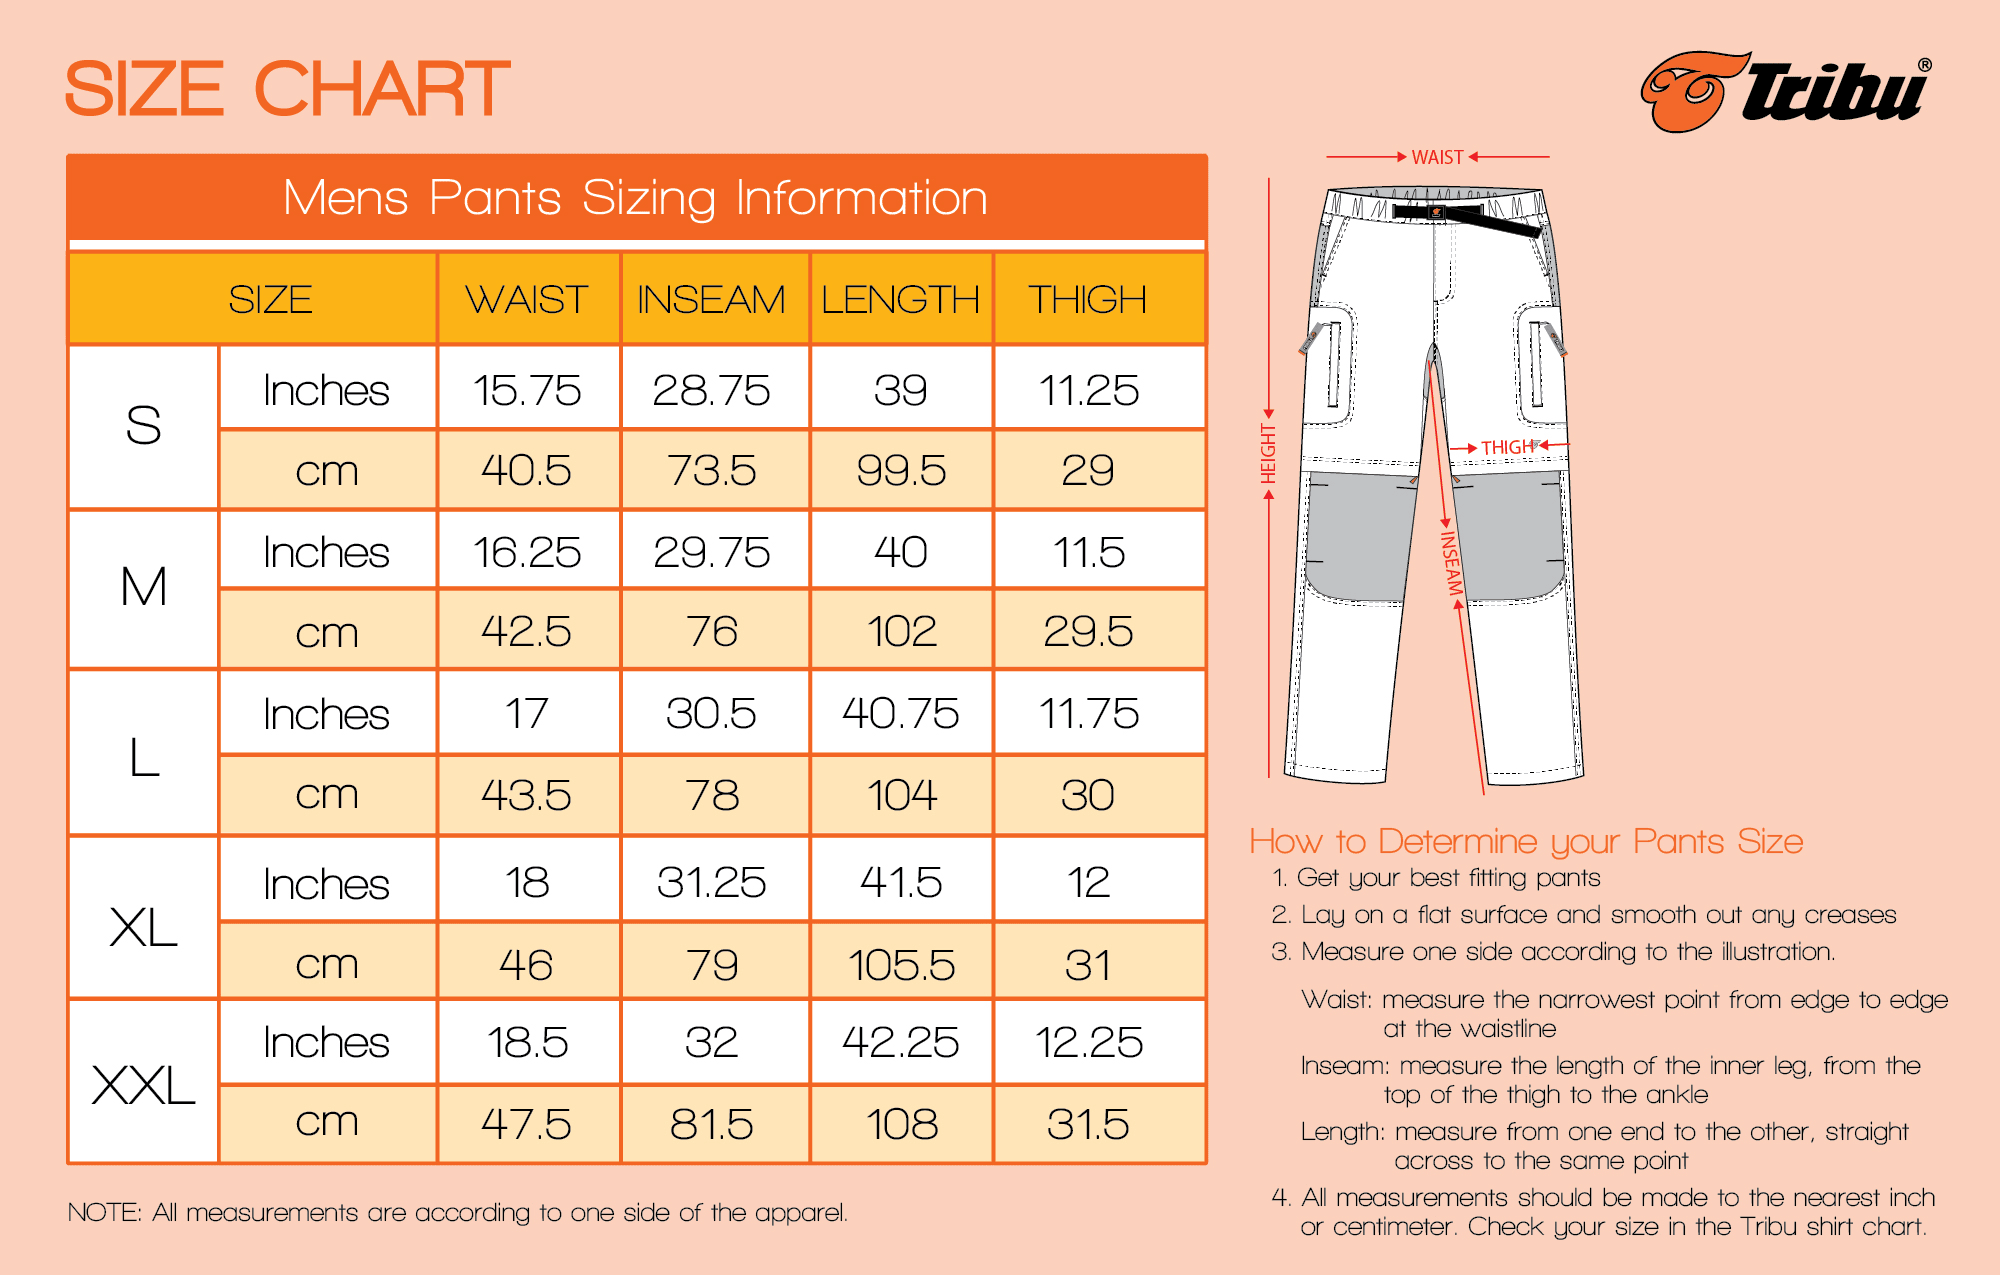 Womens To Mens Pants Size Chart